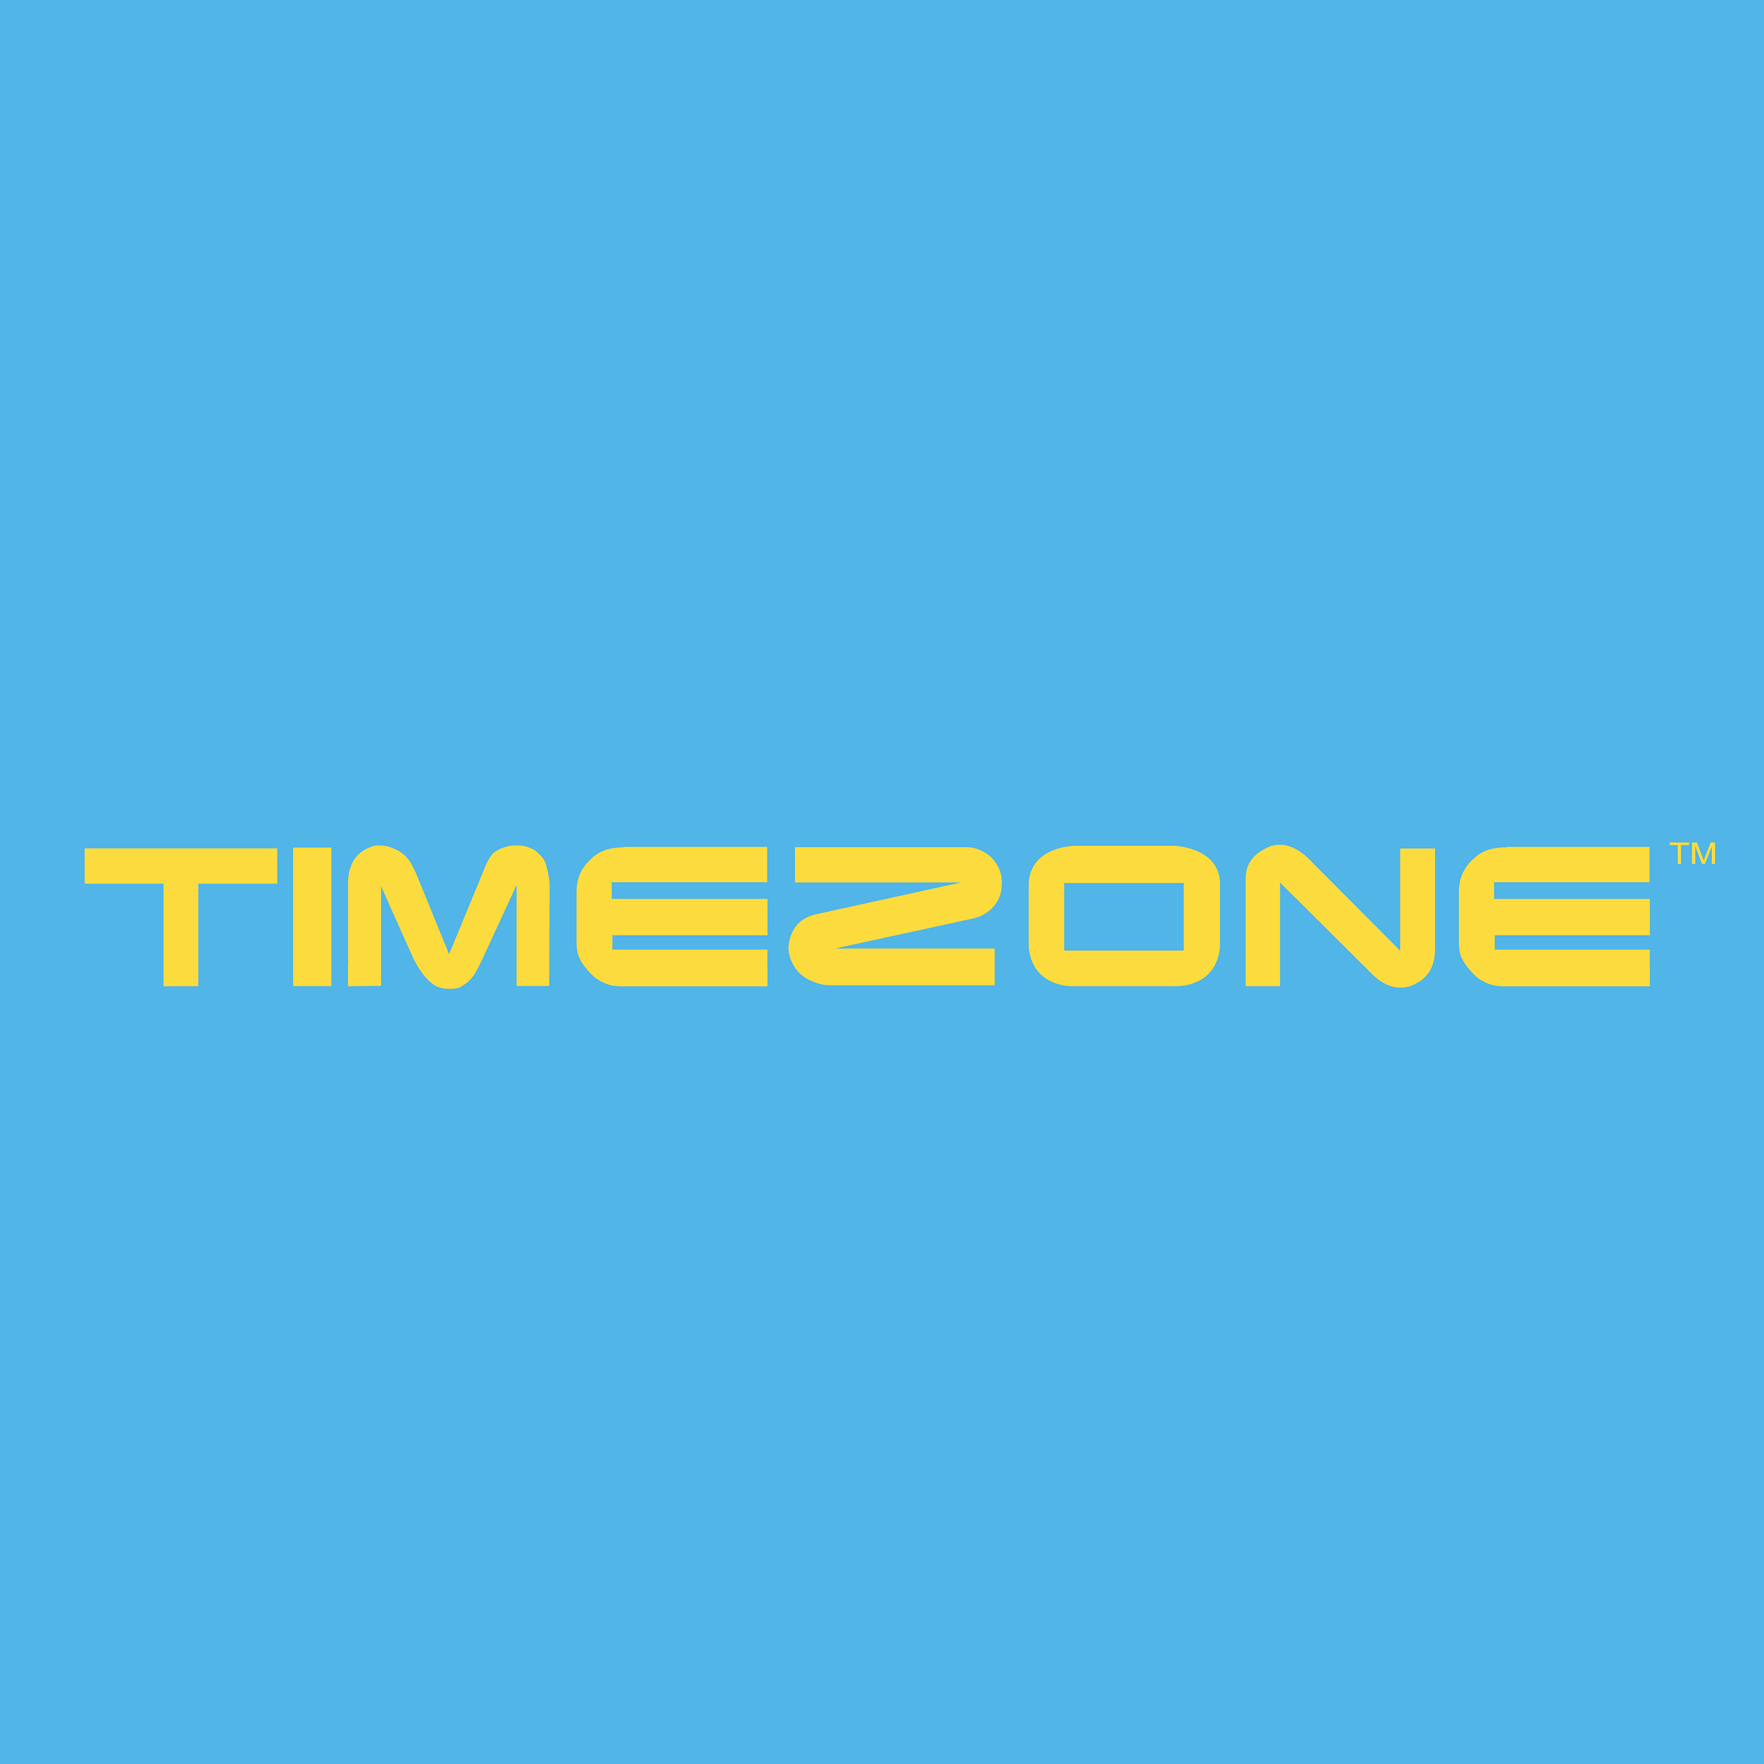 Timezone (Compass One) - Dine, Shop, Earn